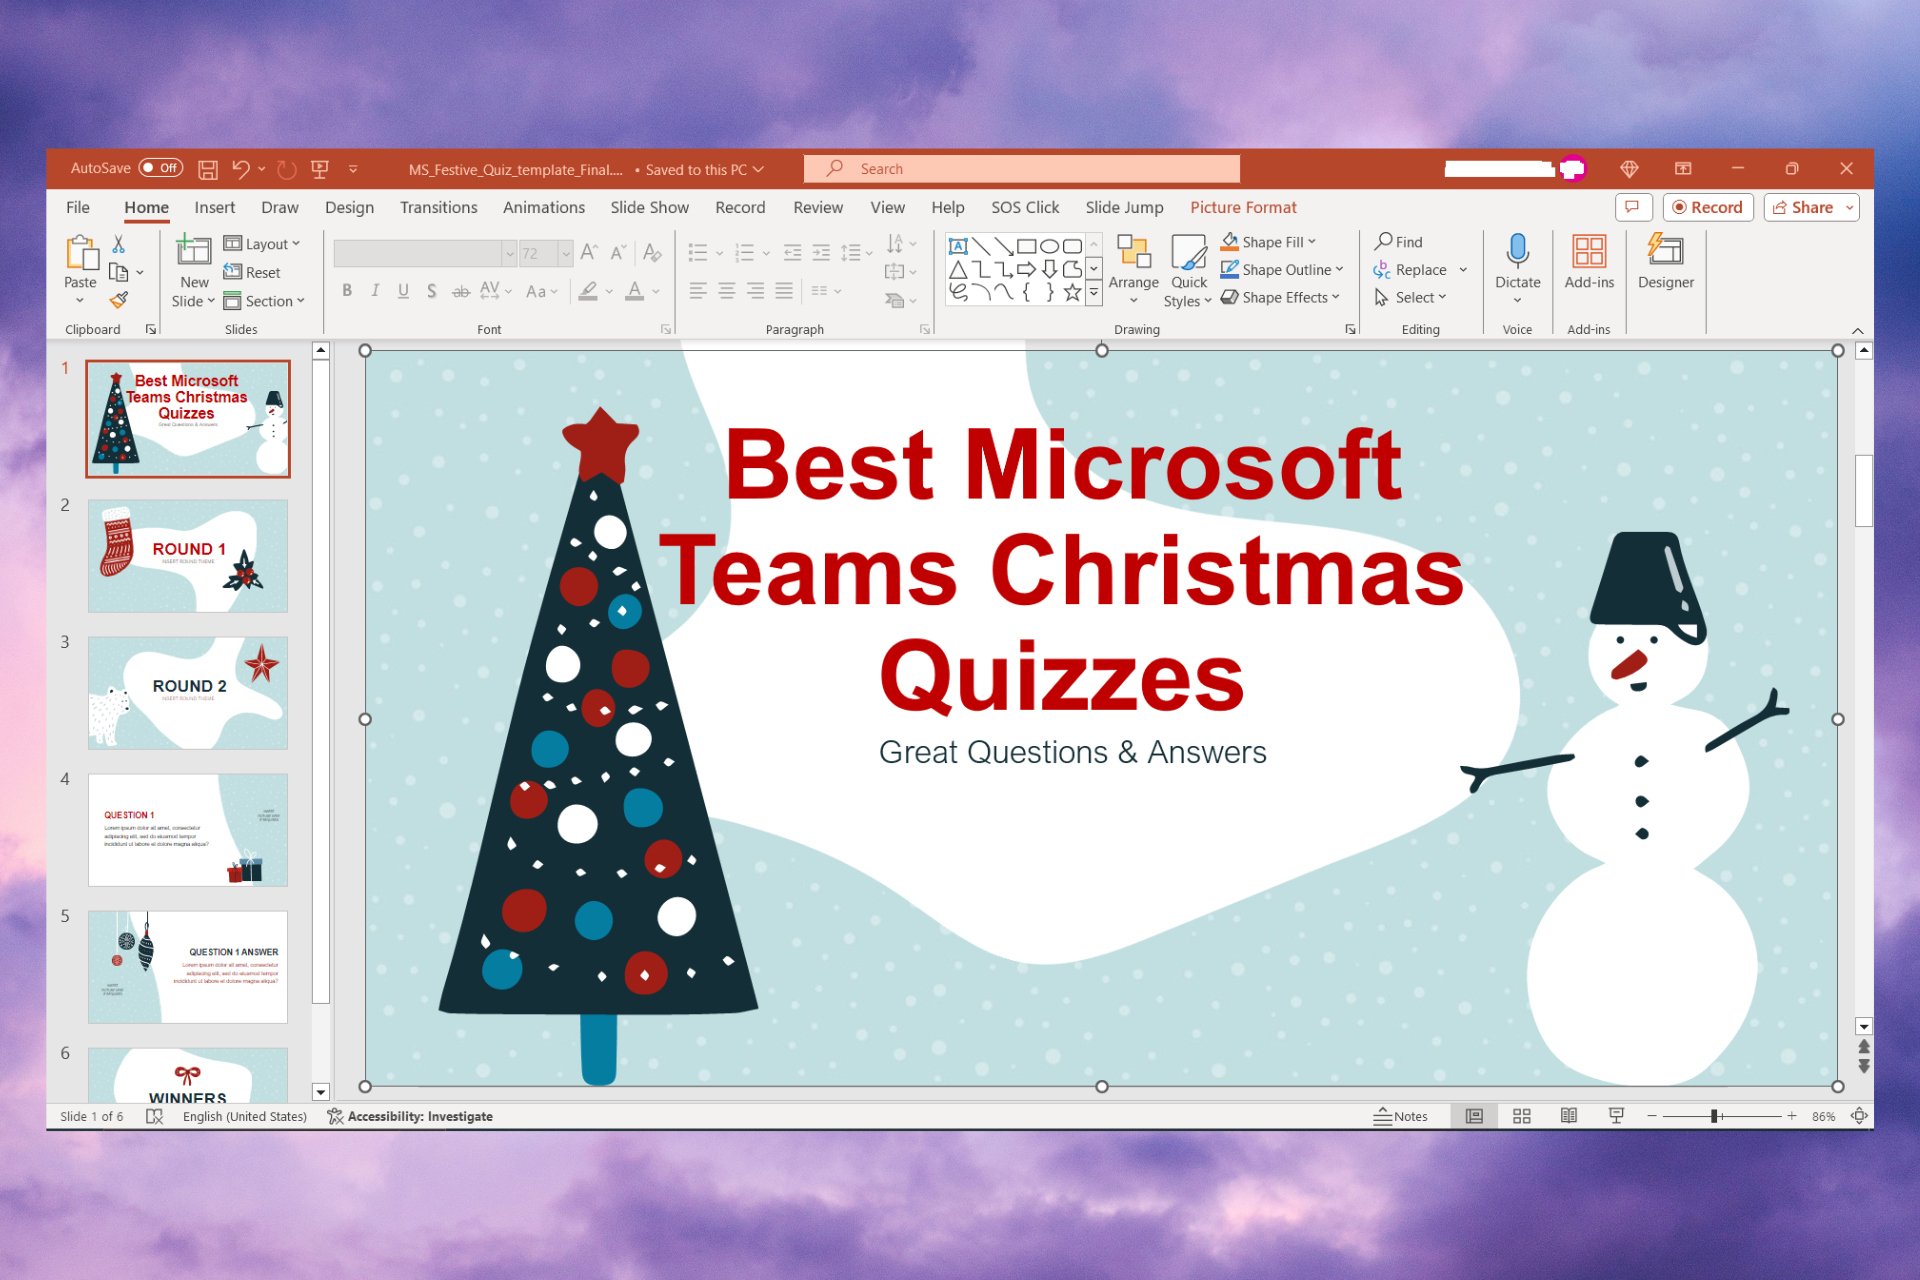 What are the best Microsoft Teams Christmas Quizzes